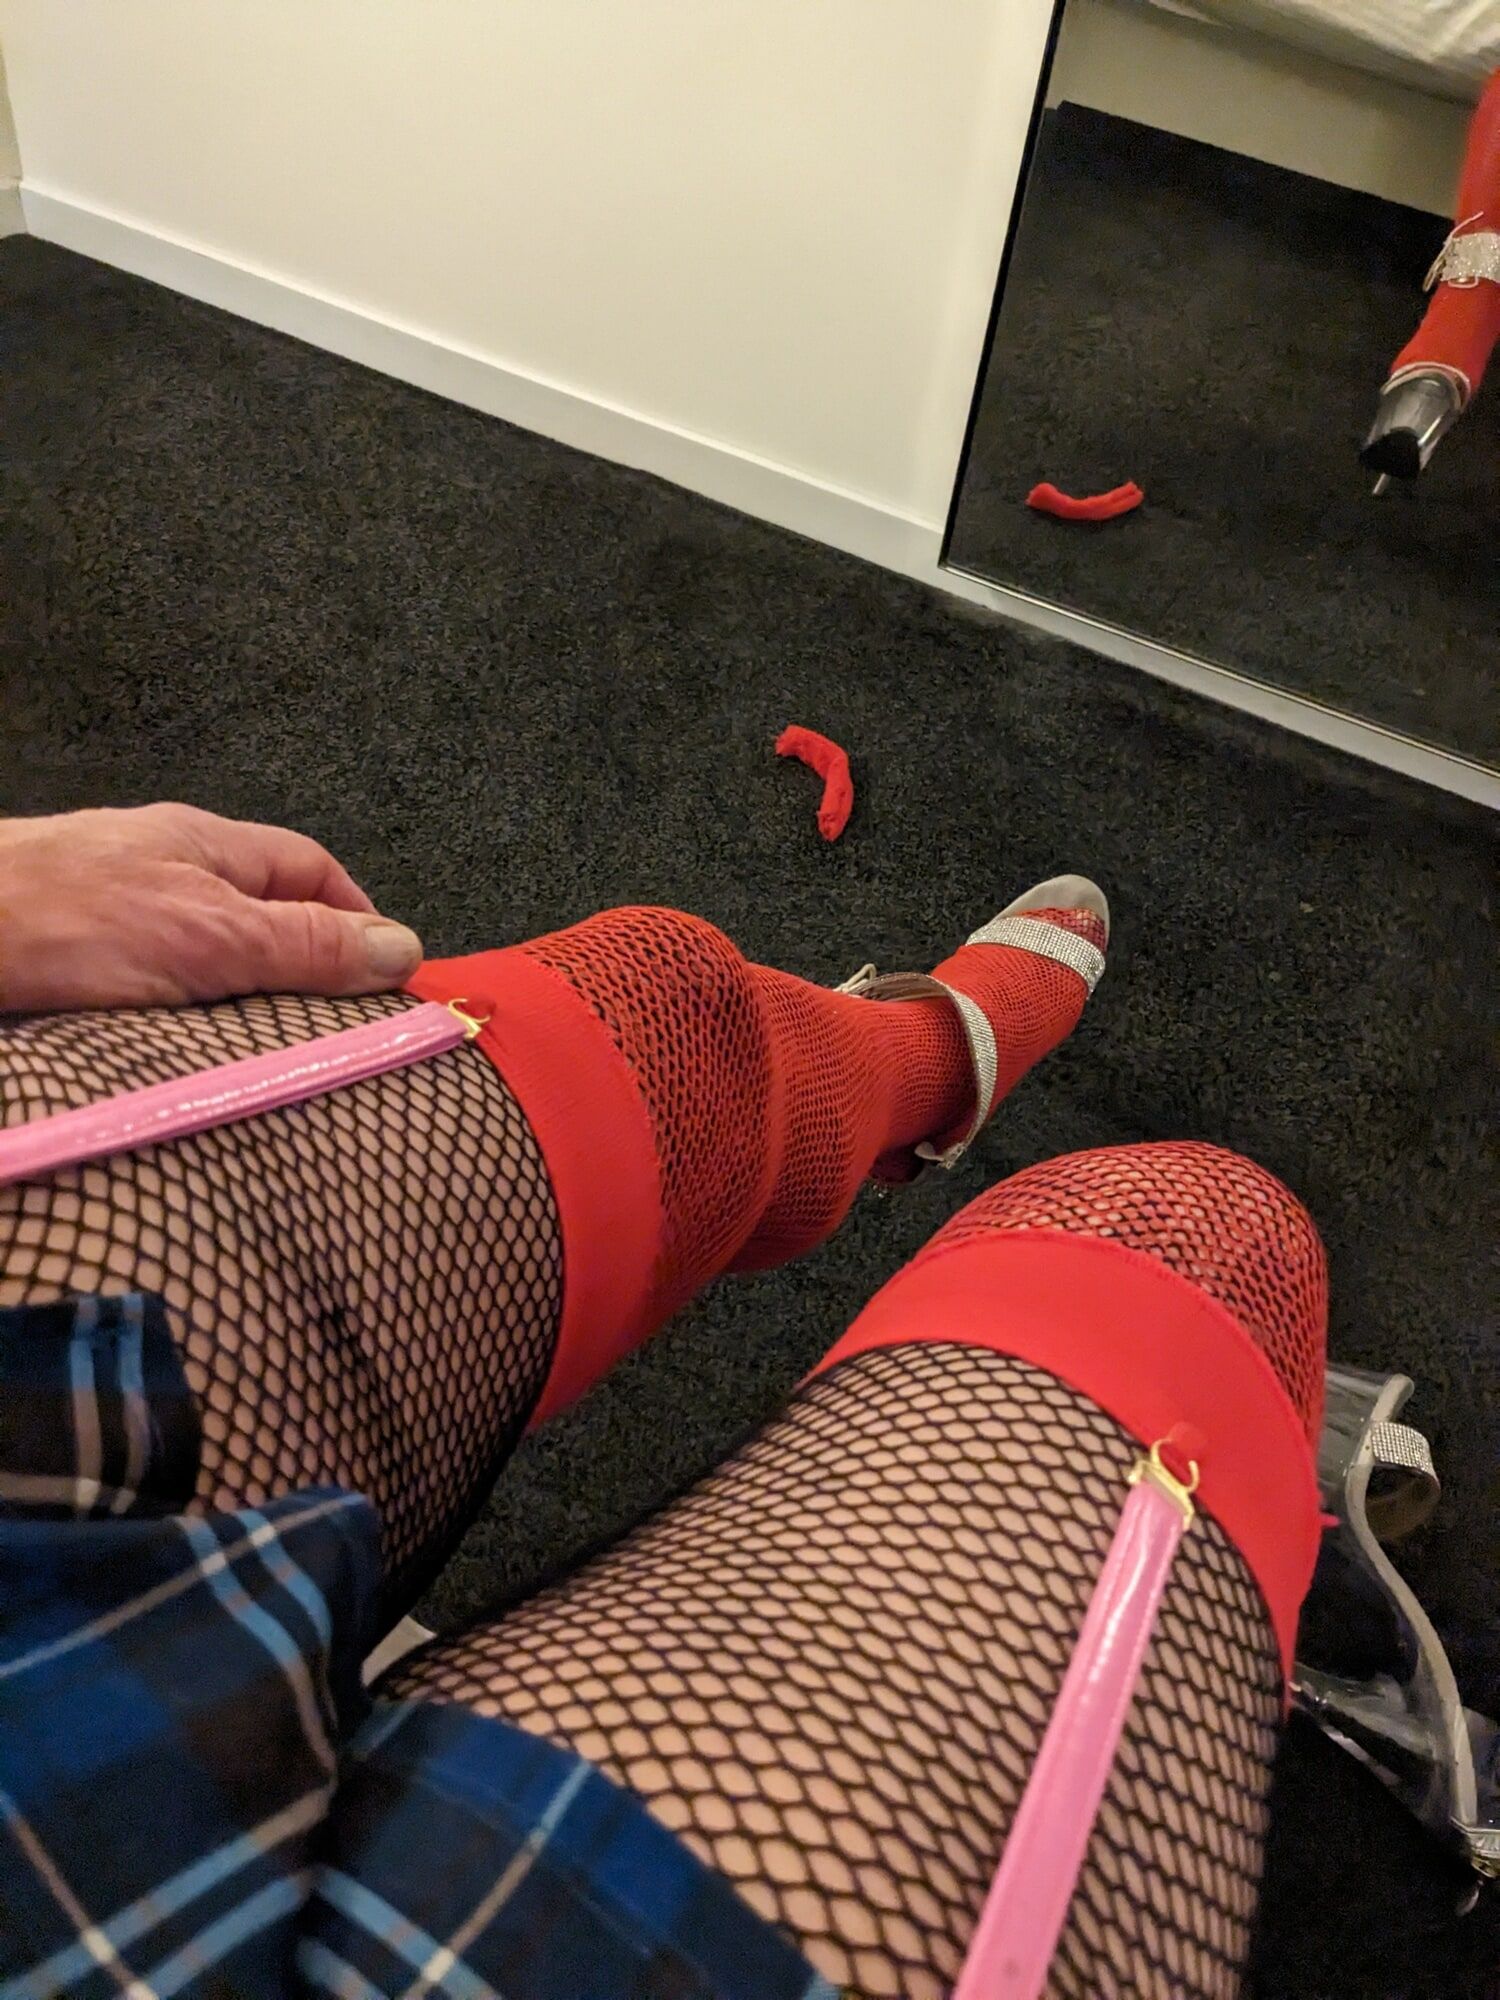 6 inch heels duing trip to adult theater 